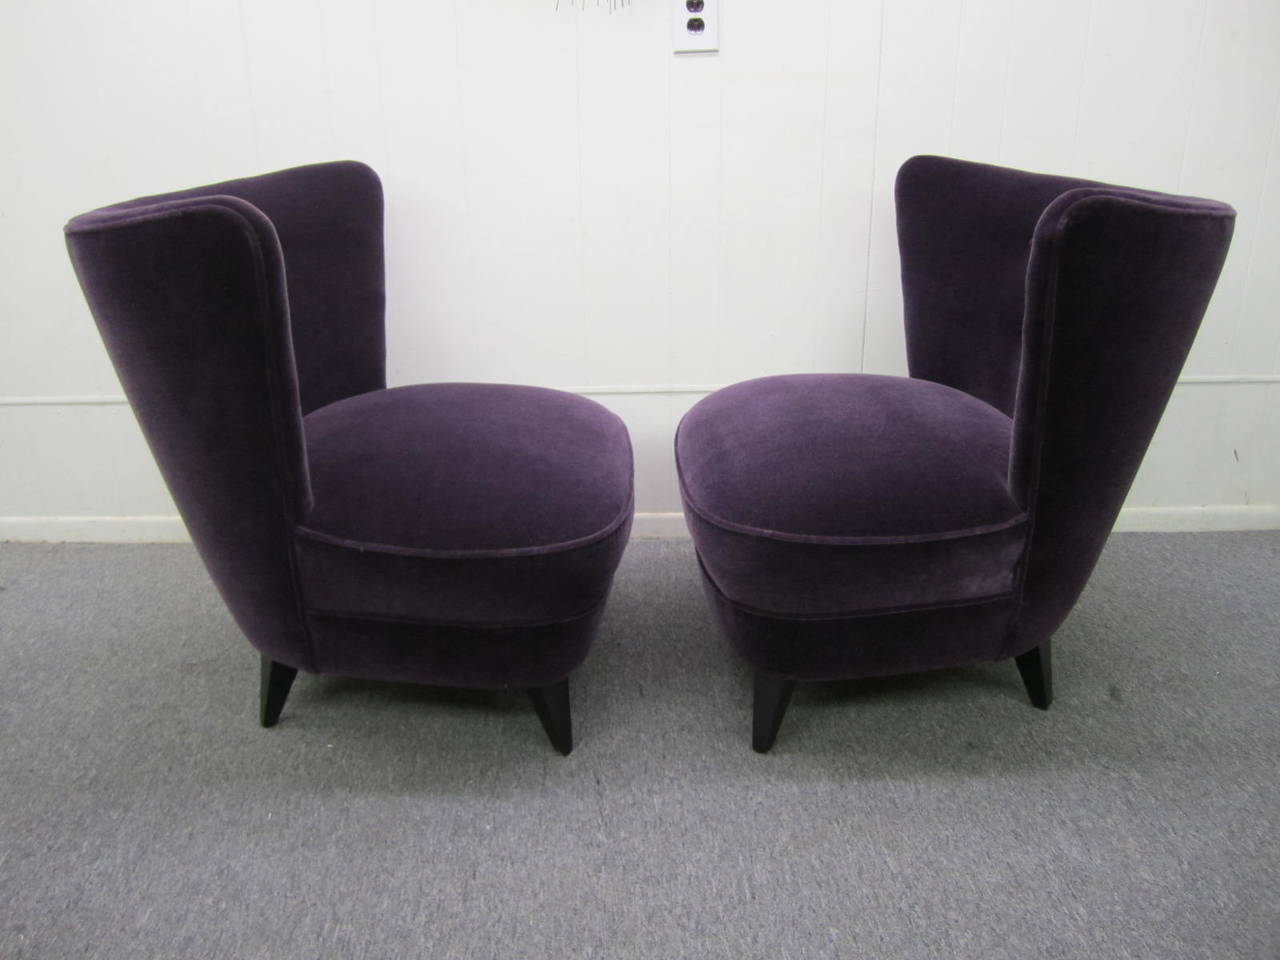 Hollywood Regency Stunning Pair of Gilbert Rohde 1940s Wingback Slipper Chairs, Mid-Century